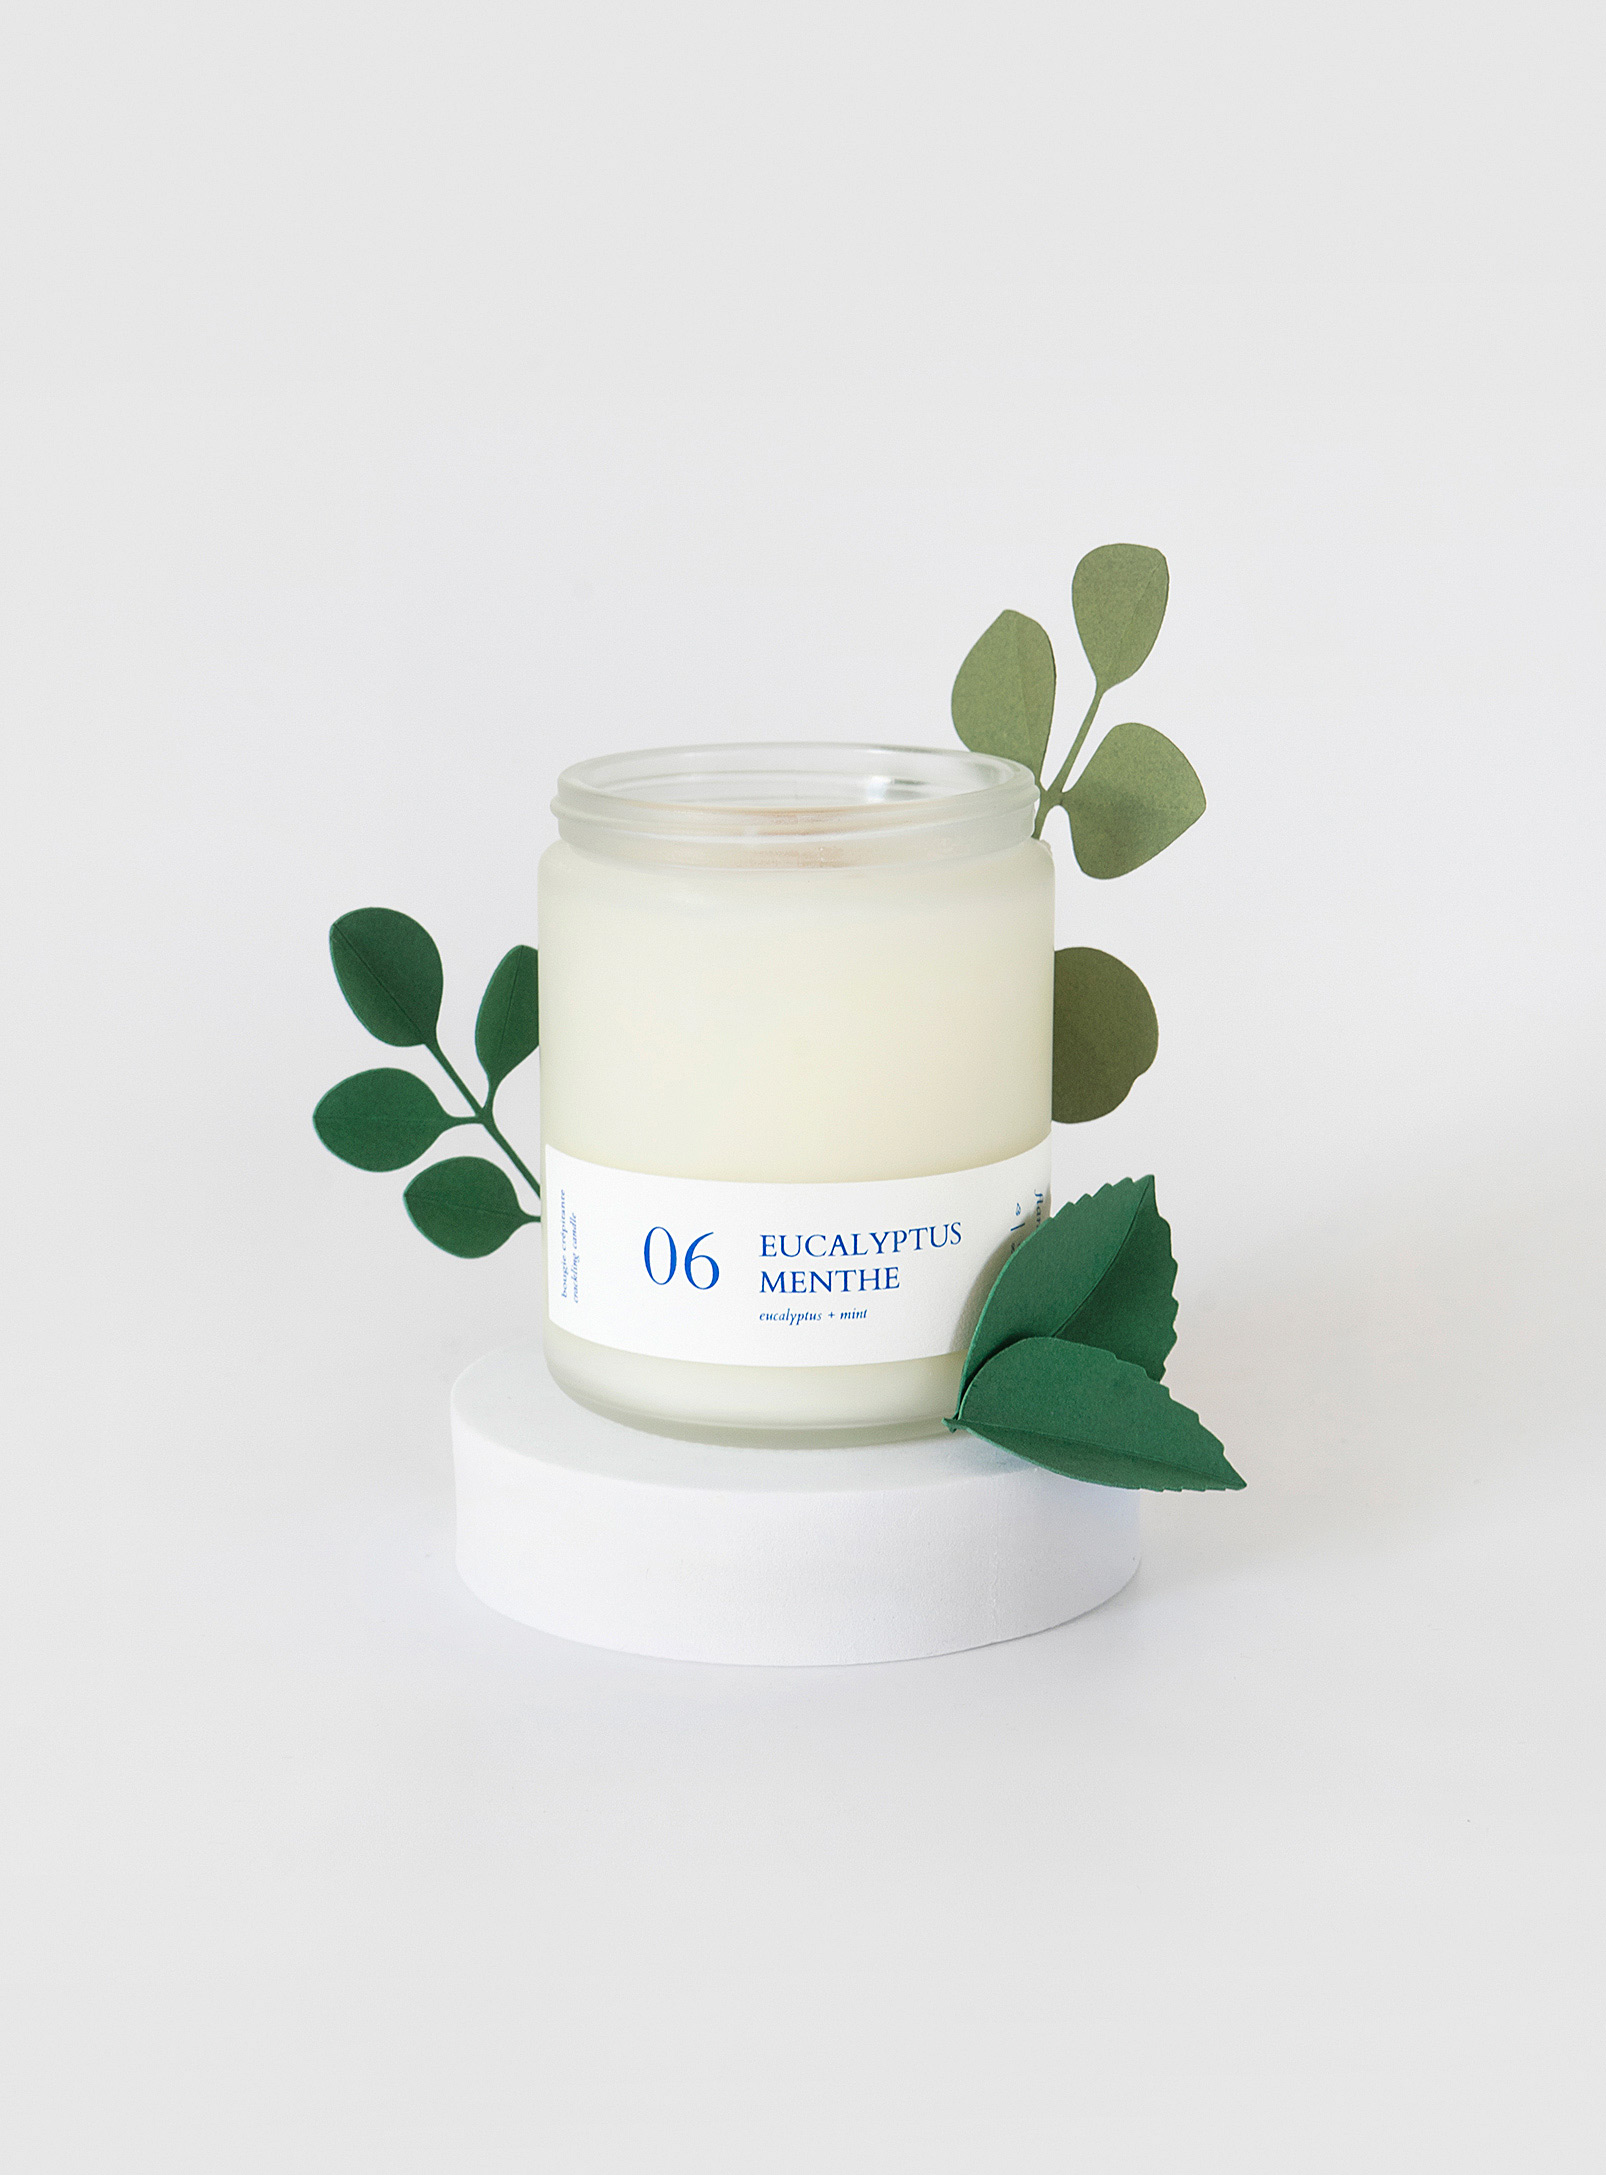 Flambette - Eucalyptus and mint scented candle set